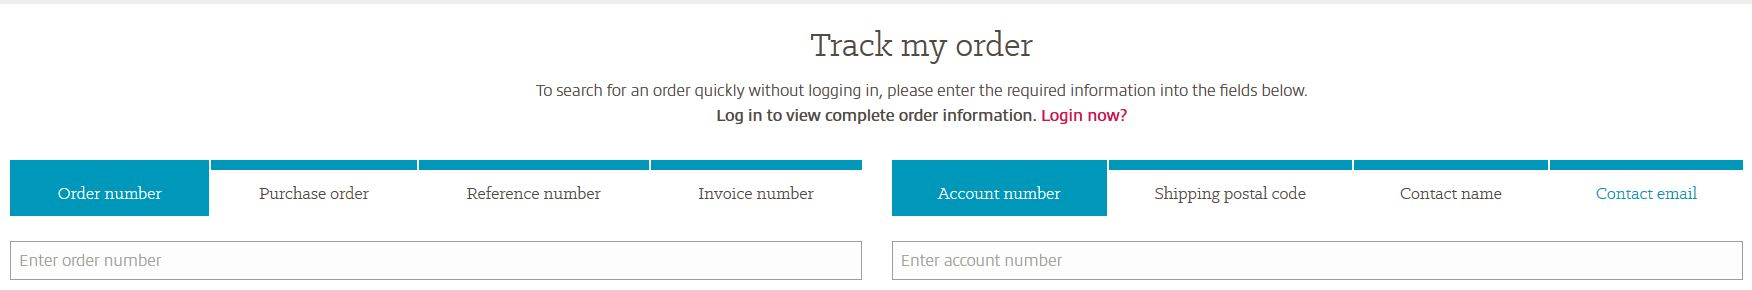 Display for Track my order on Insight.com